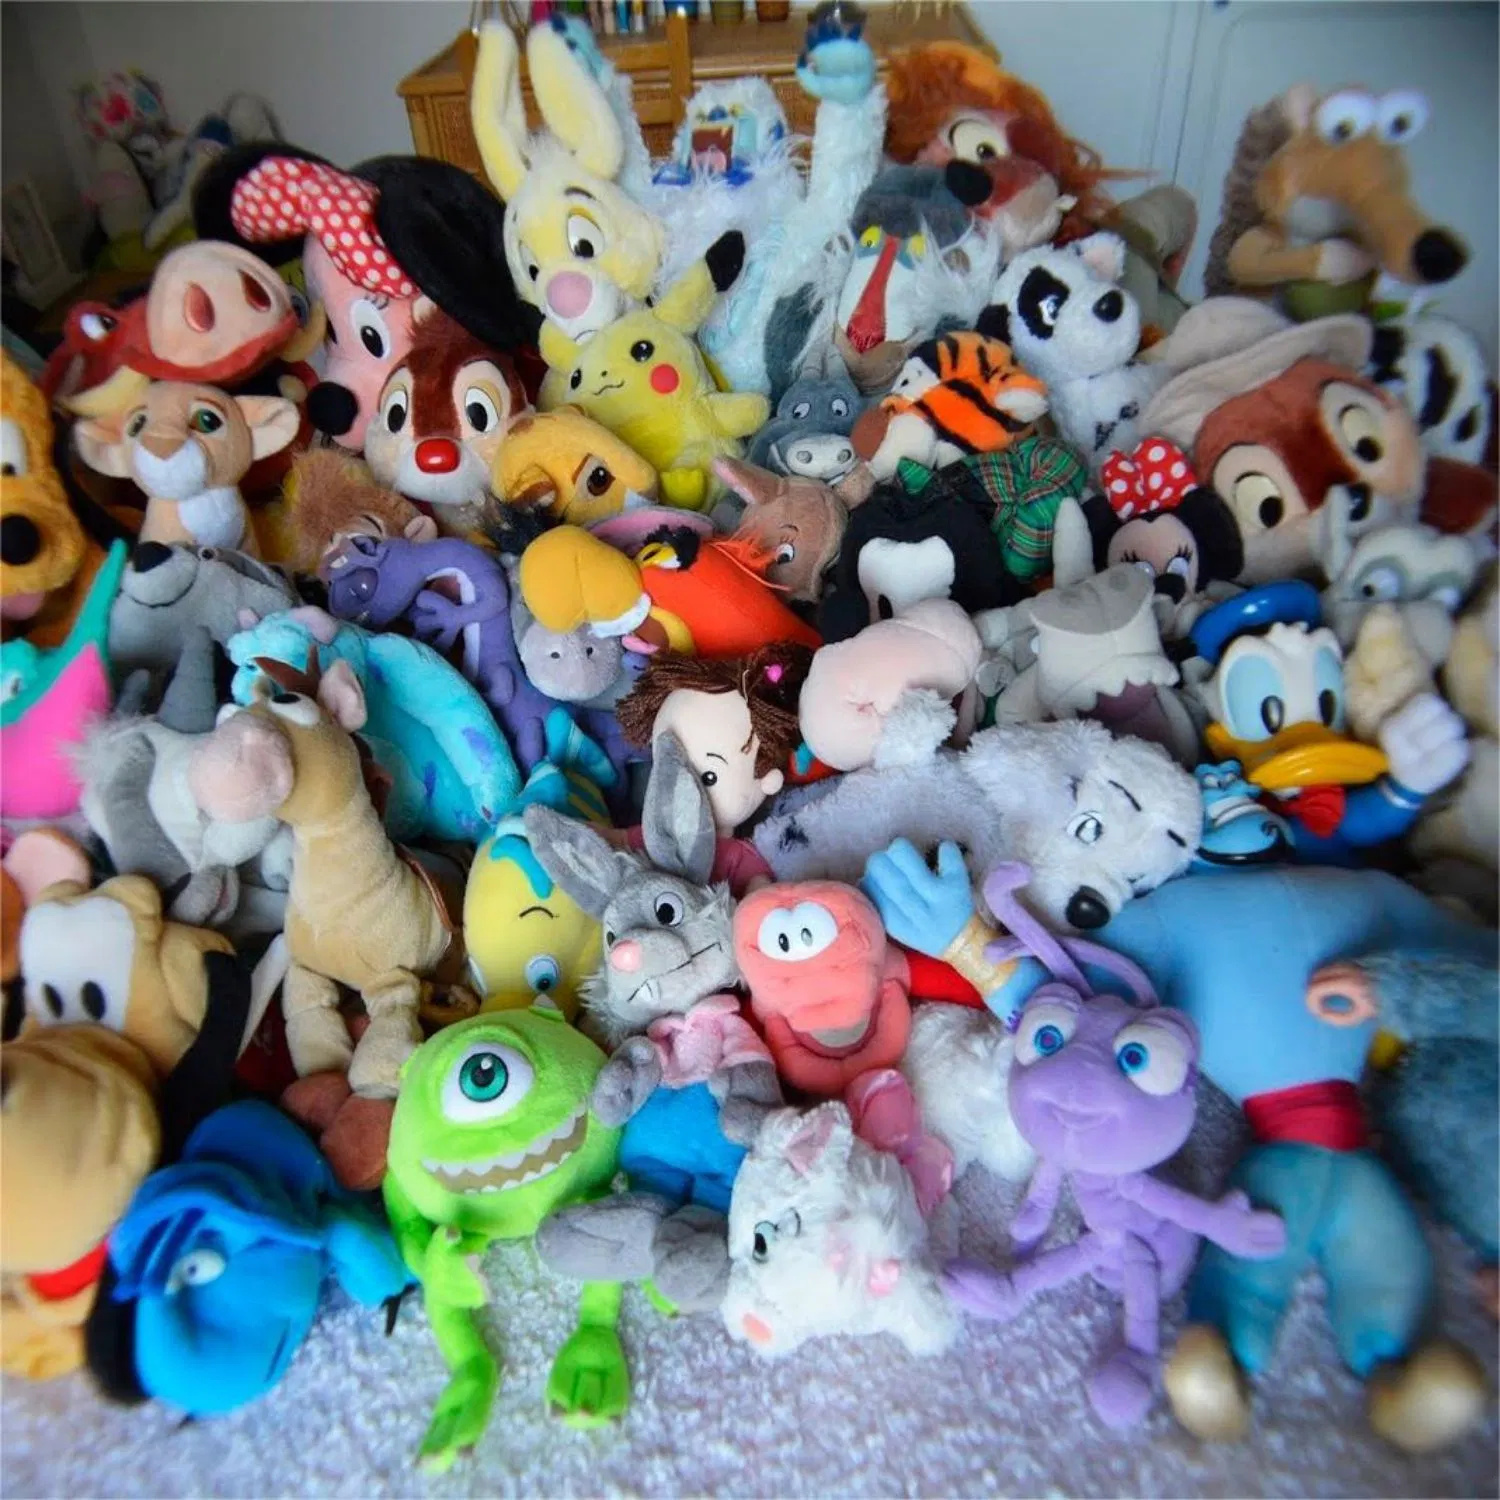 Plush Toy Production: From Design to Finished Product